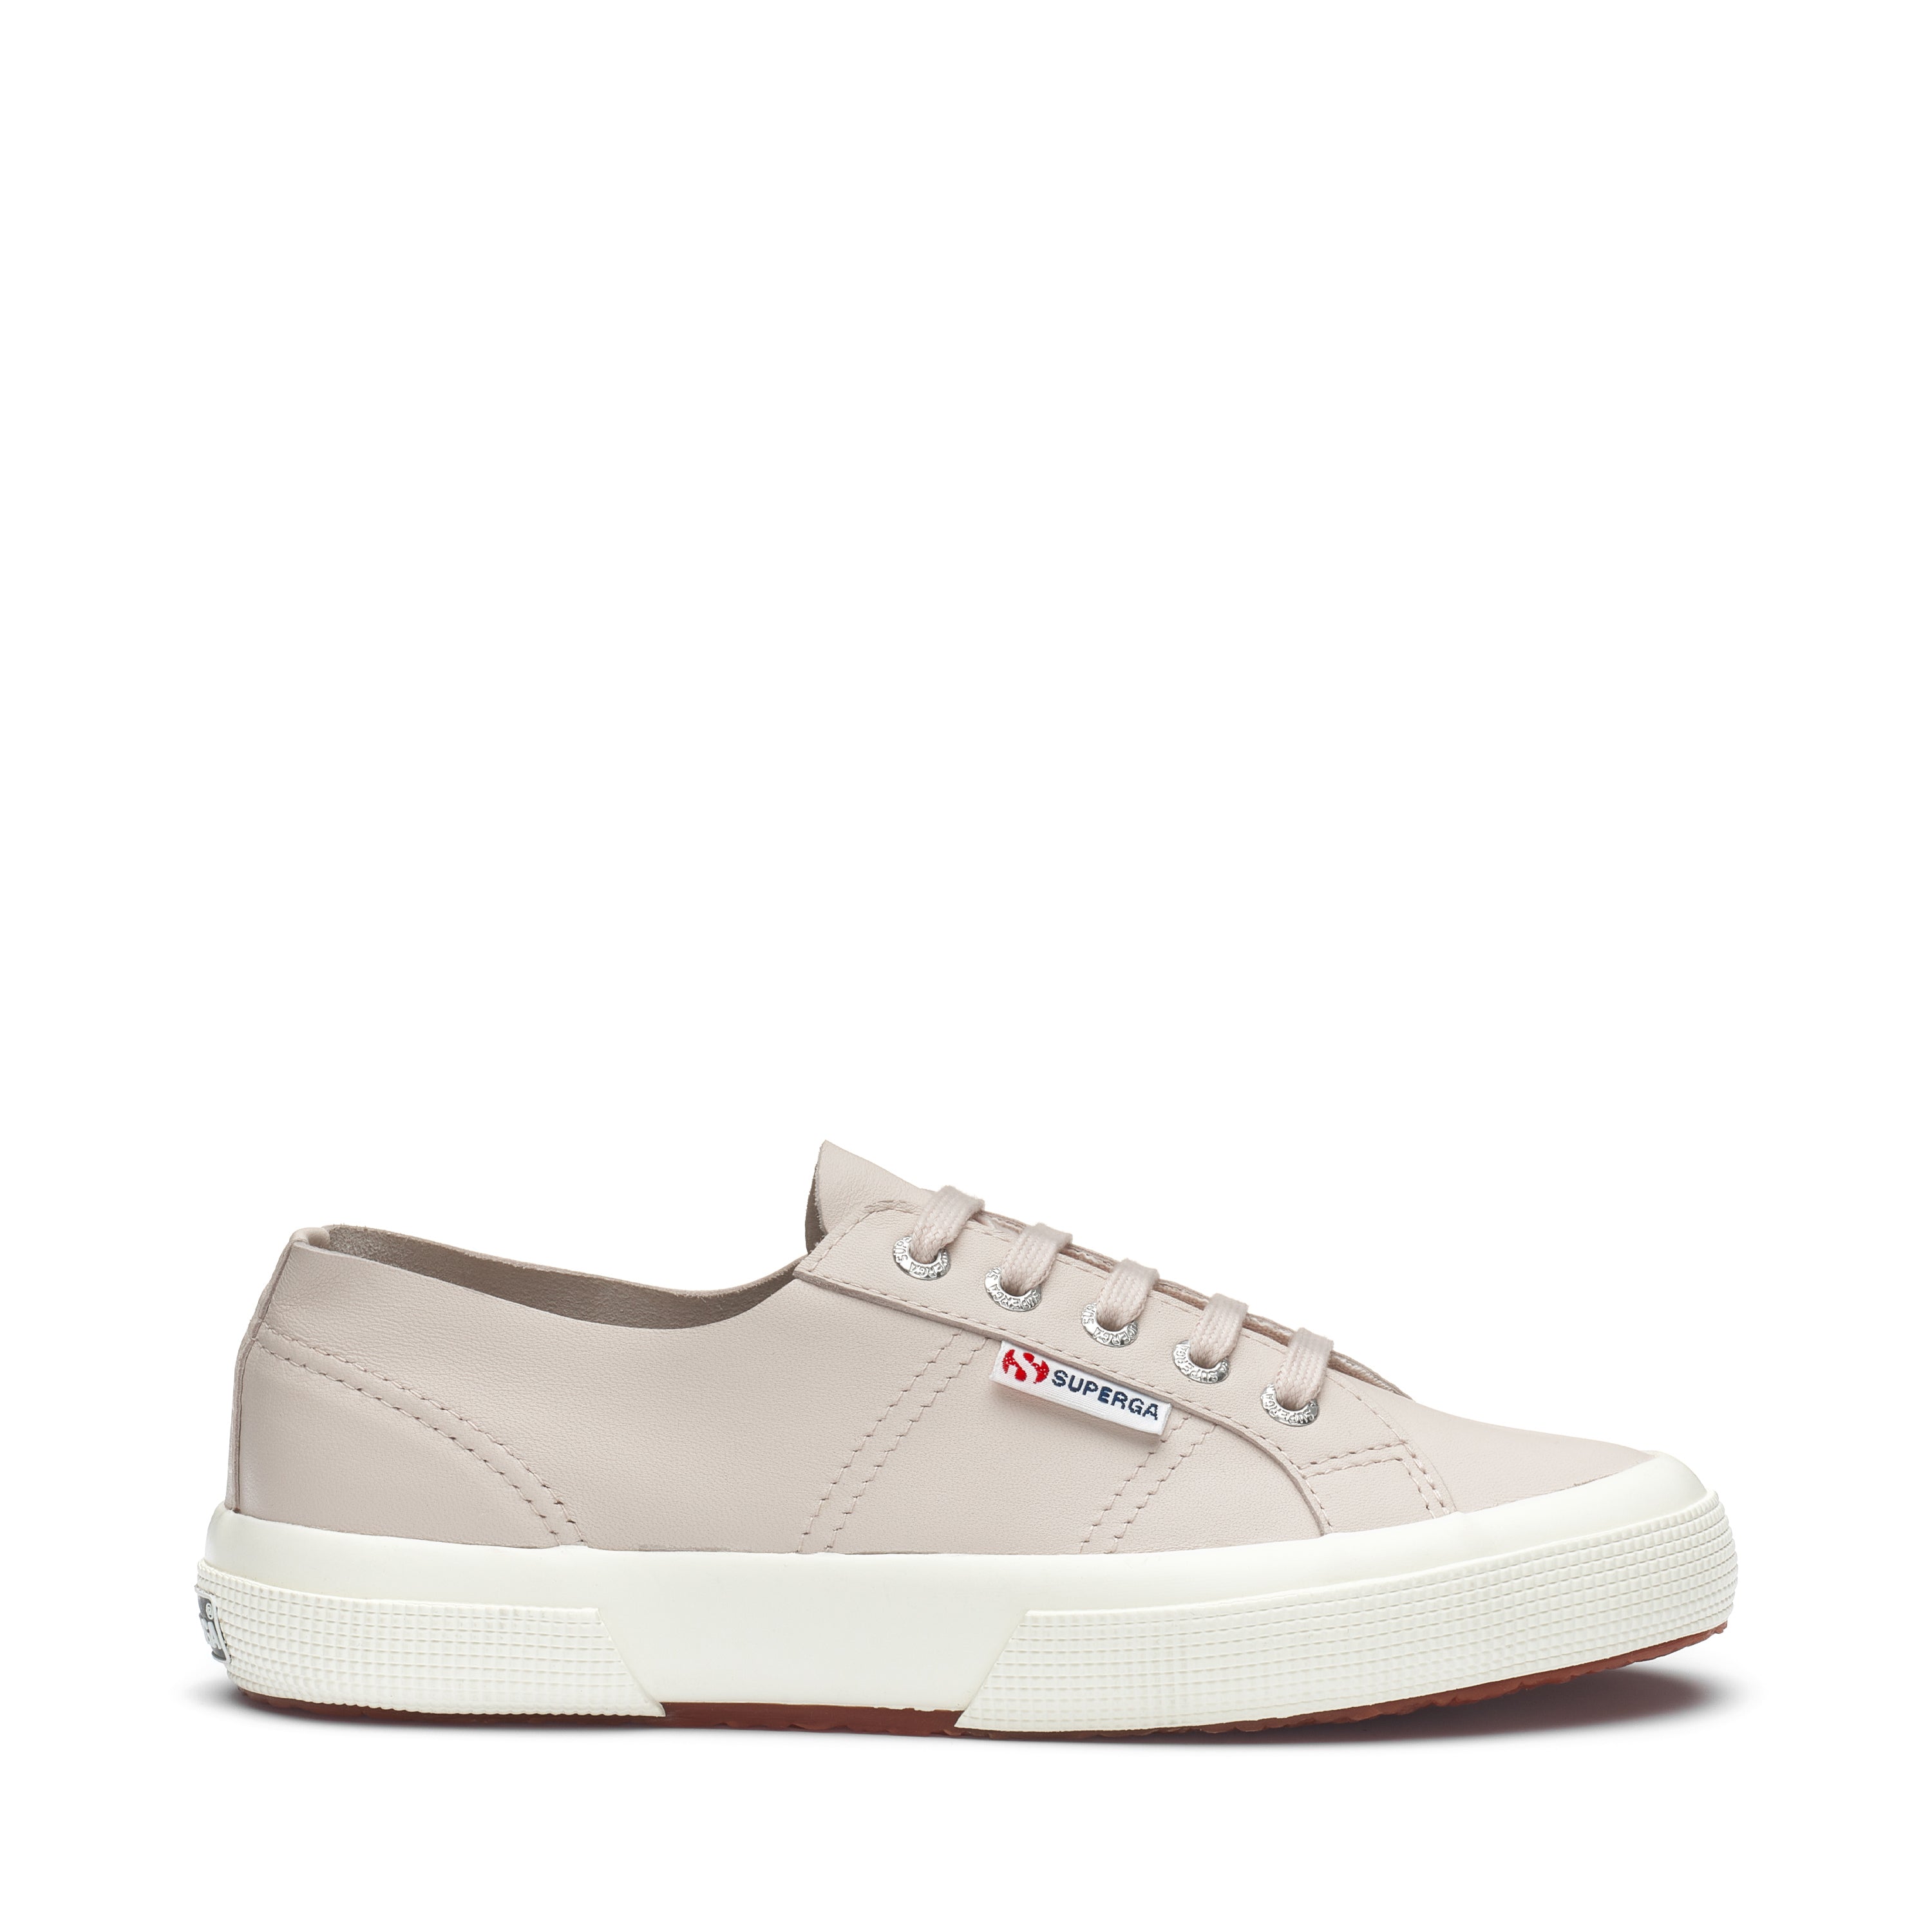 Superga 2750 Unlined Nappa Sneakers - Light Pink. Side view.